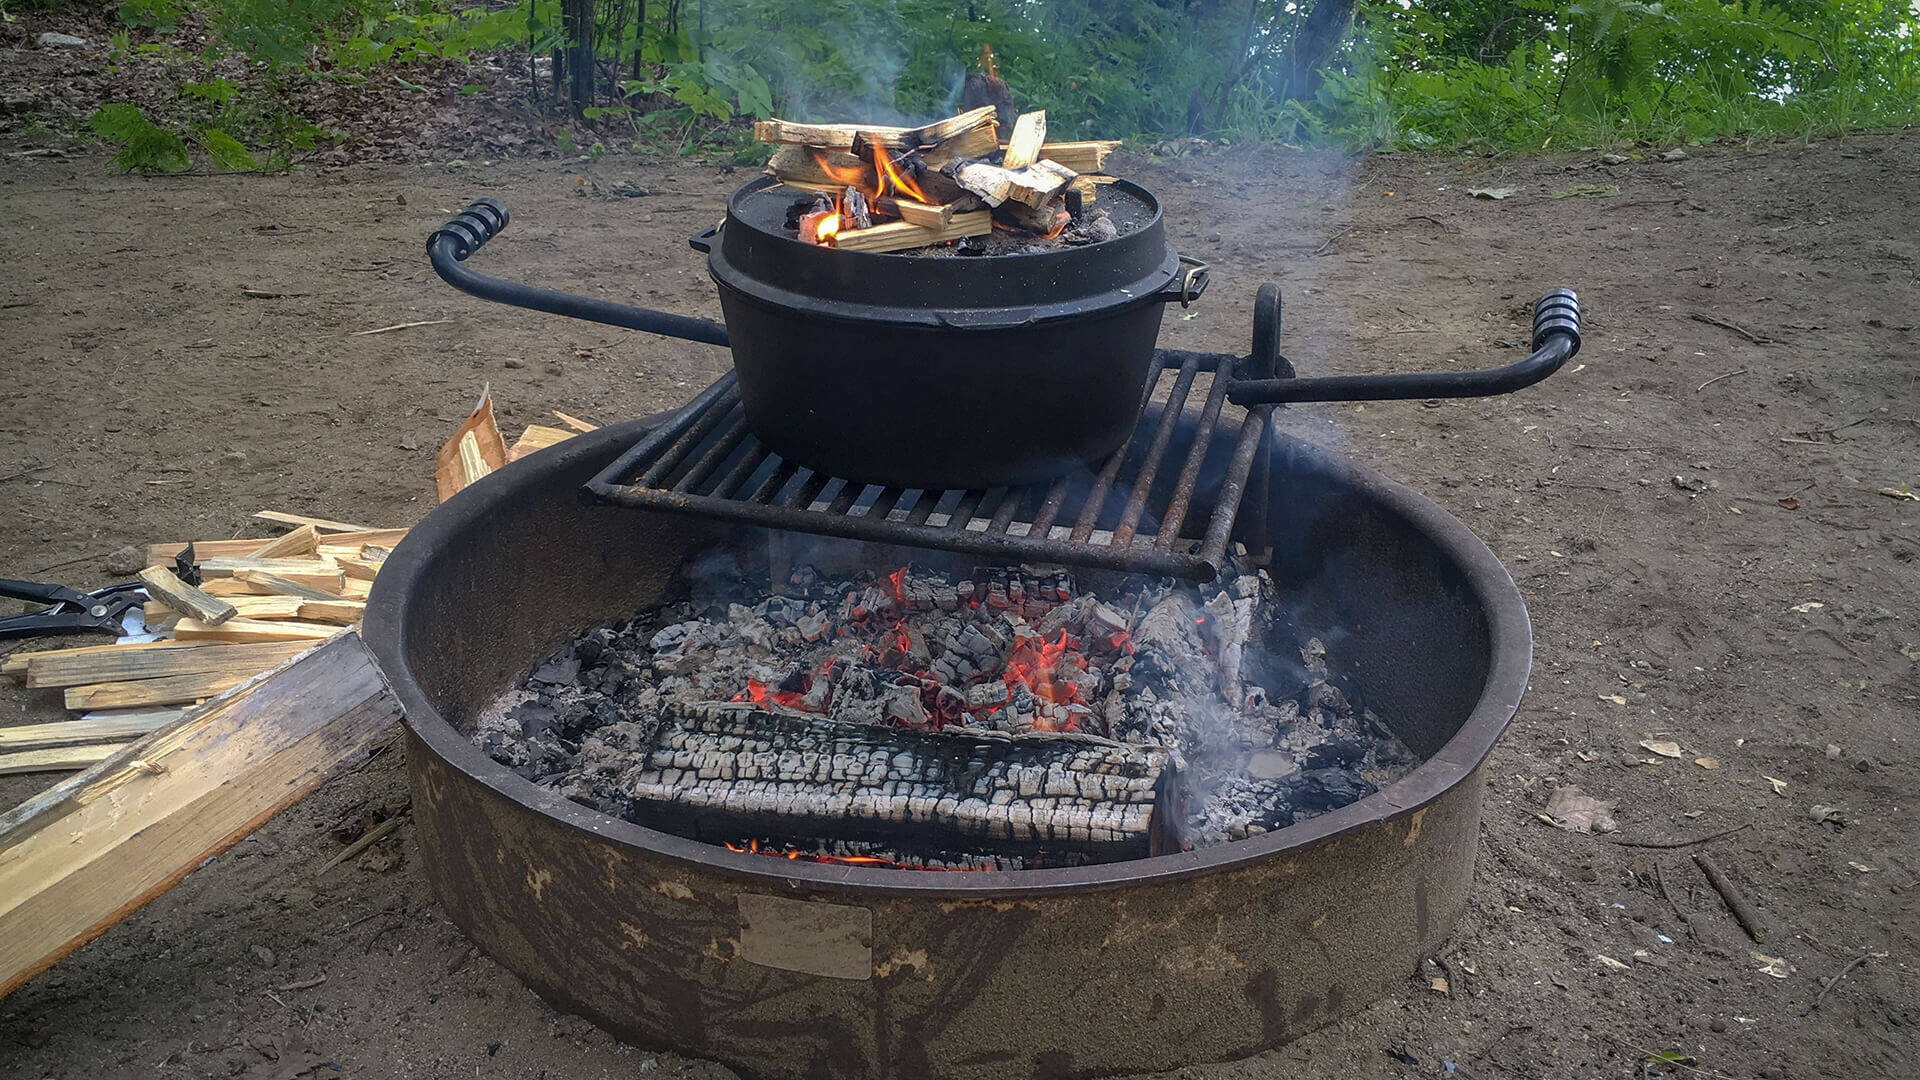 Dutch Oven Camping Recipes for Perfect Campfire Meals